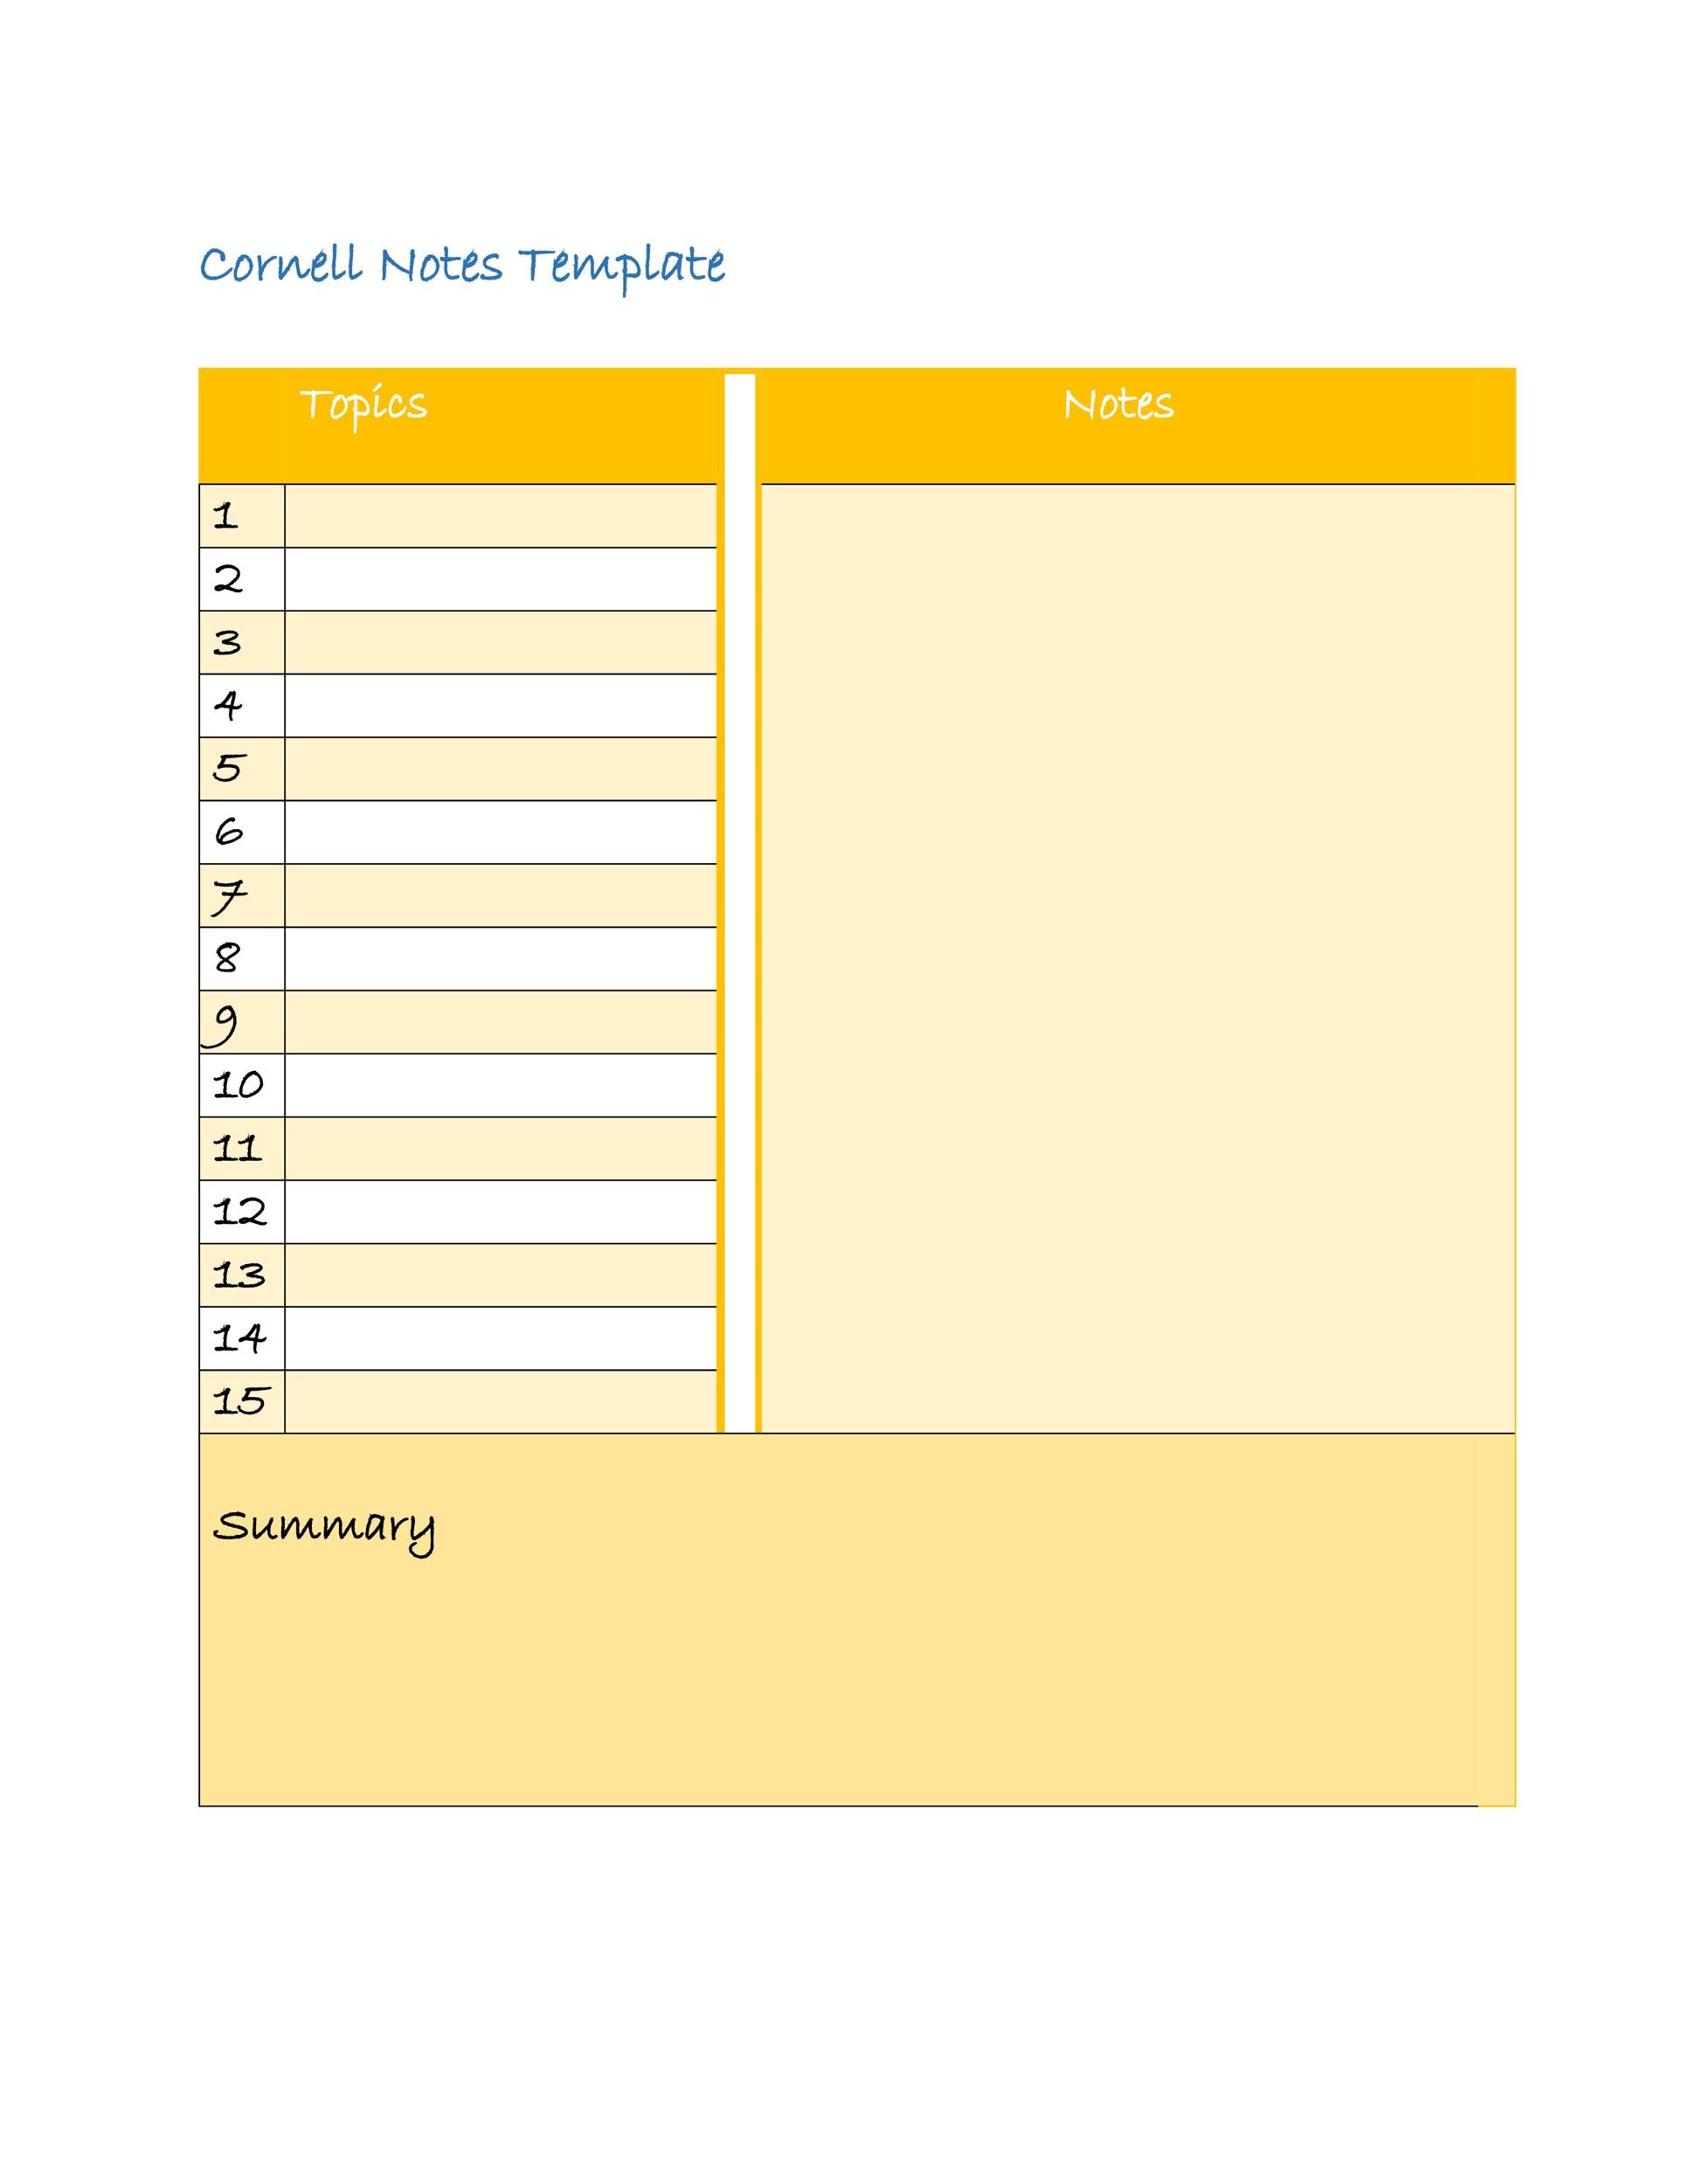 Free Cornell Notes Template 27